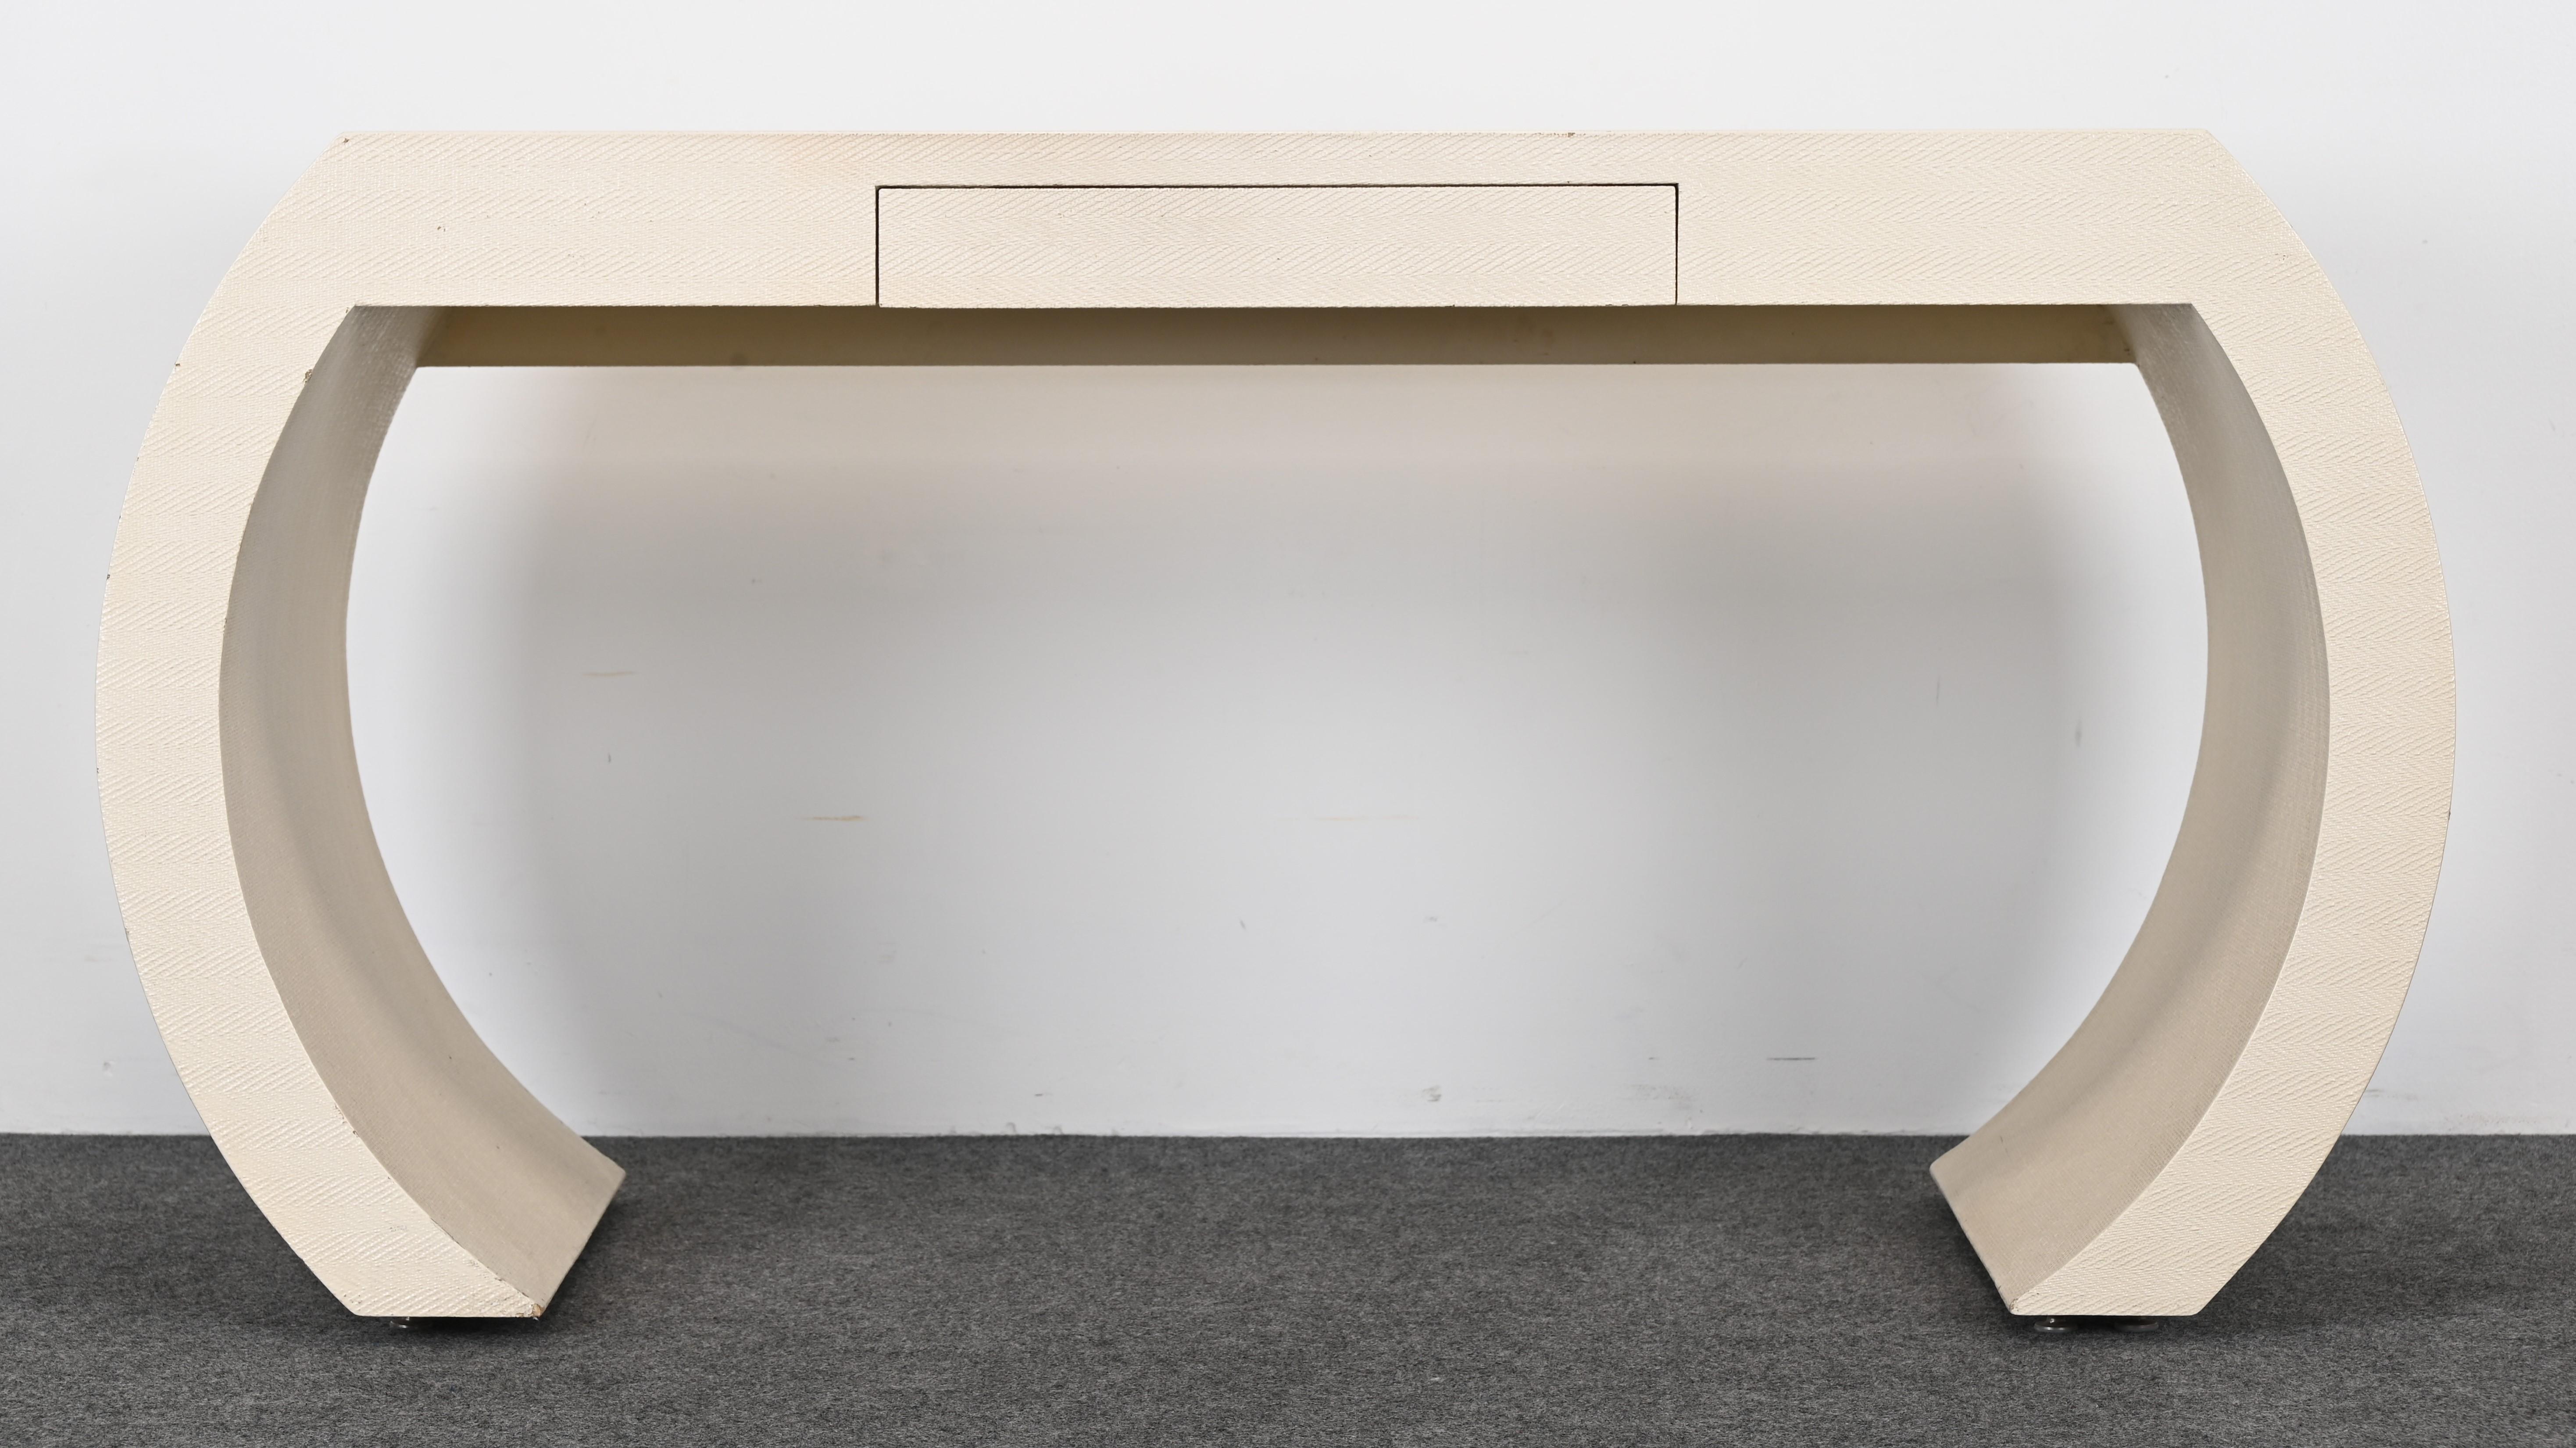 A chic lacquered linen-covered scroll desk with one drawer. This beautiful ivory Karl Springer-style simple line desk would look great in any interior. It would work well with Mid-Century Modern as well as Traditional. The desk is structurally sound